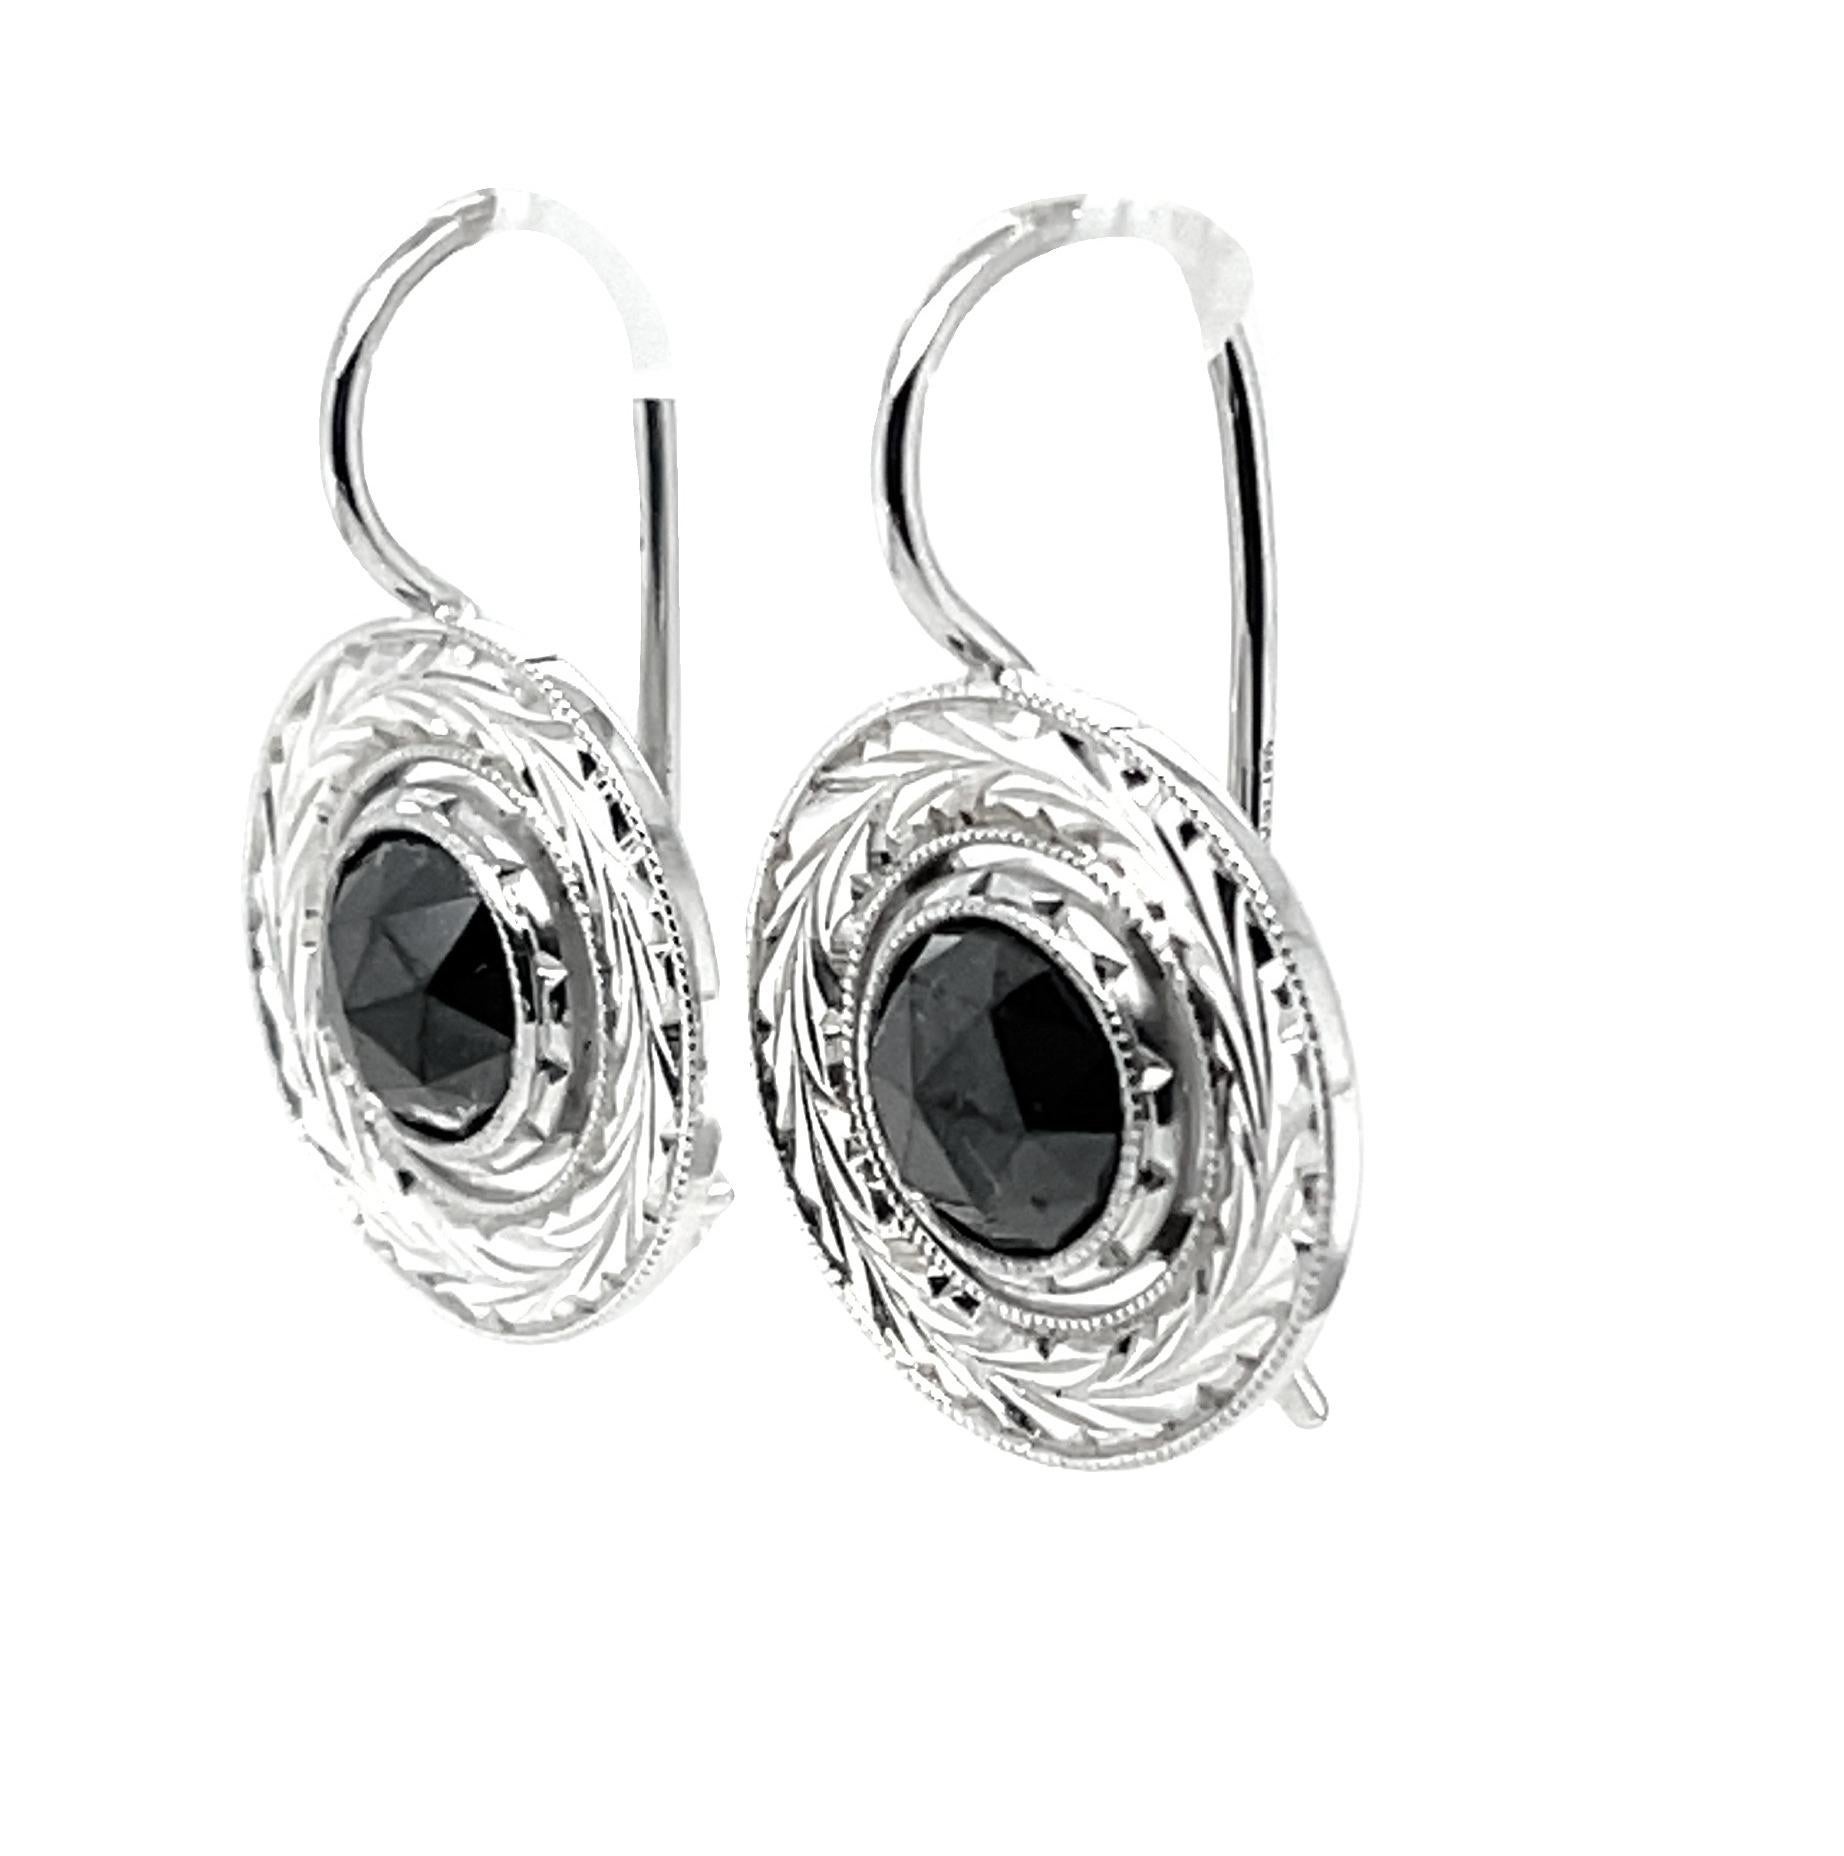 Artisan Rose Cut Black Diamond Engraved Drop Earrings in White Gold, 2.42 Carats Total For Sale